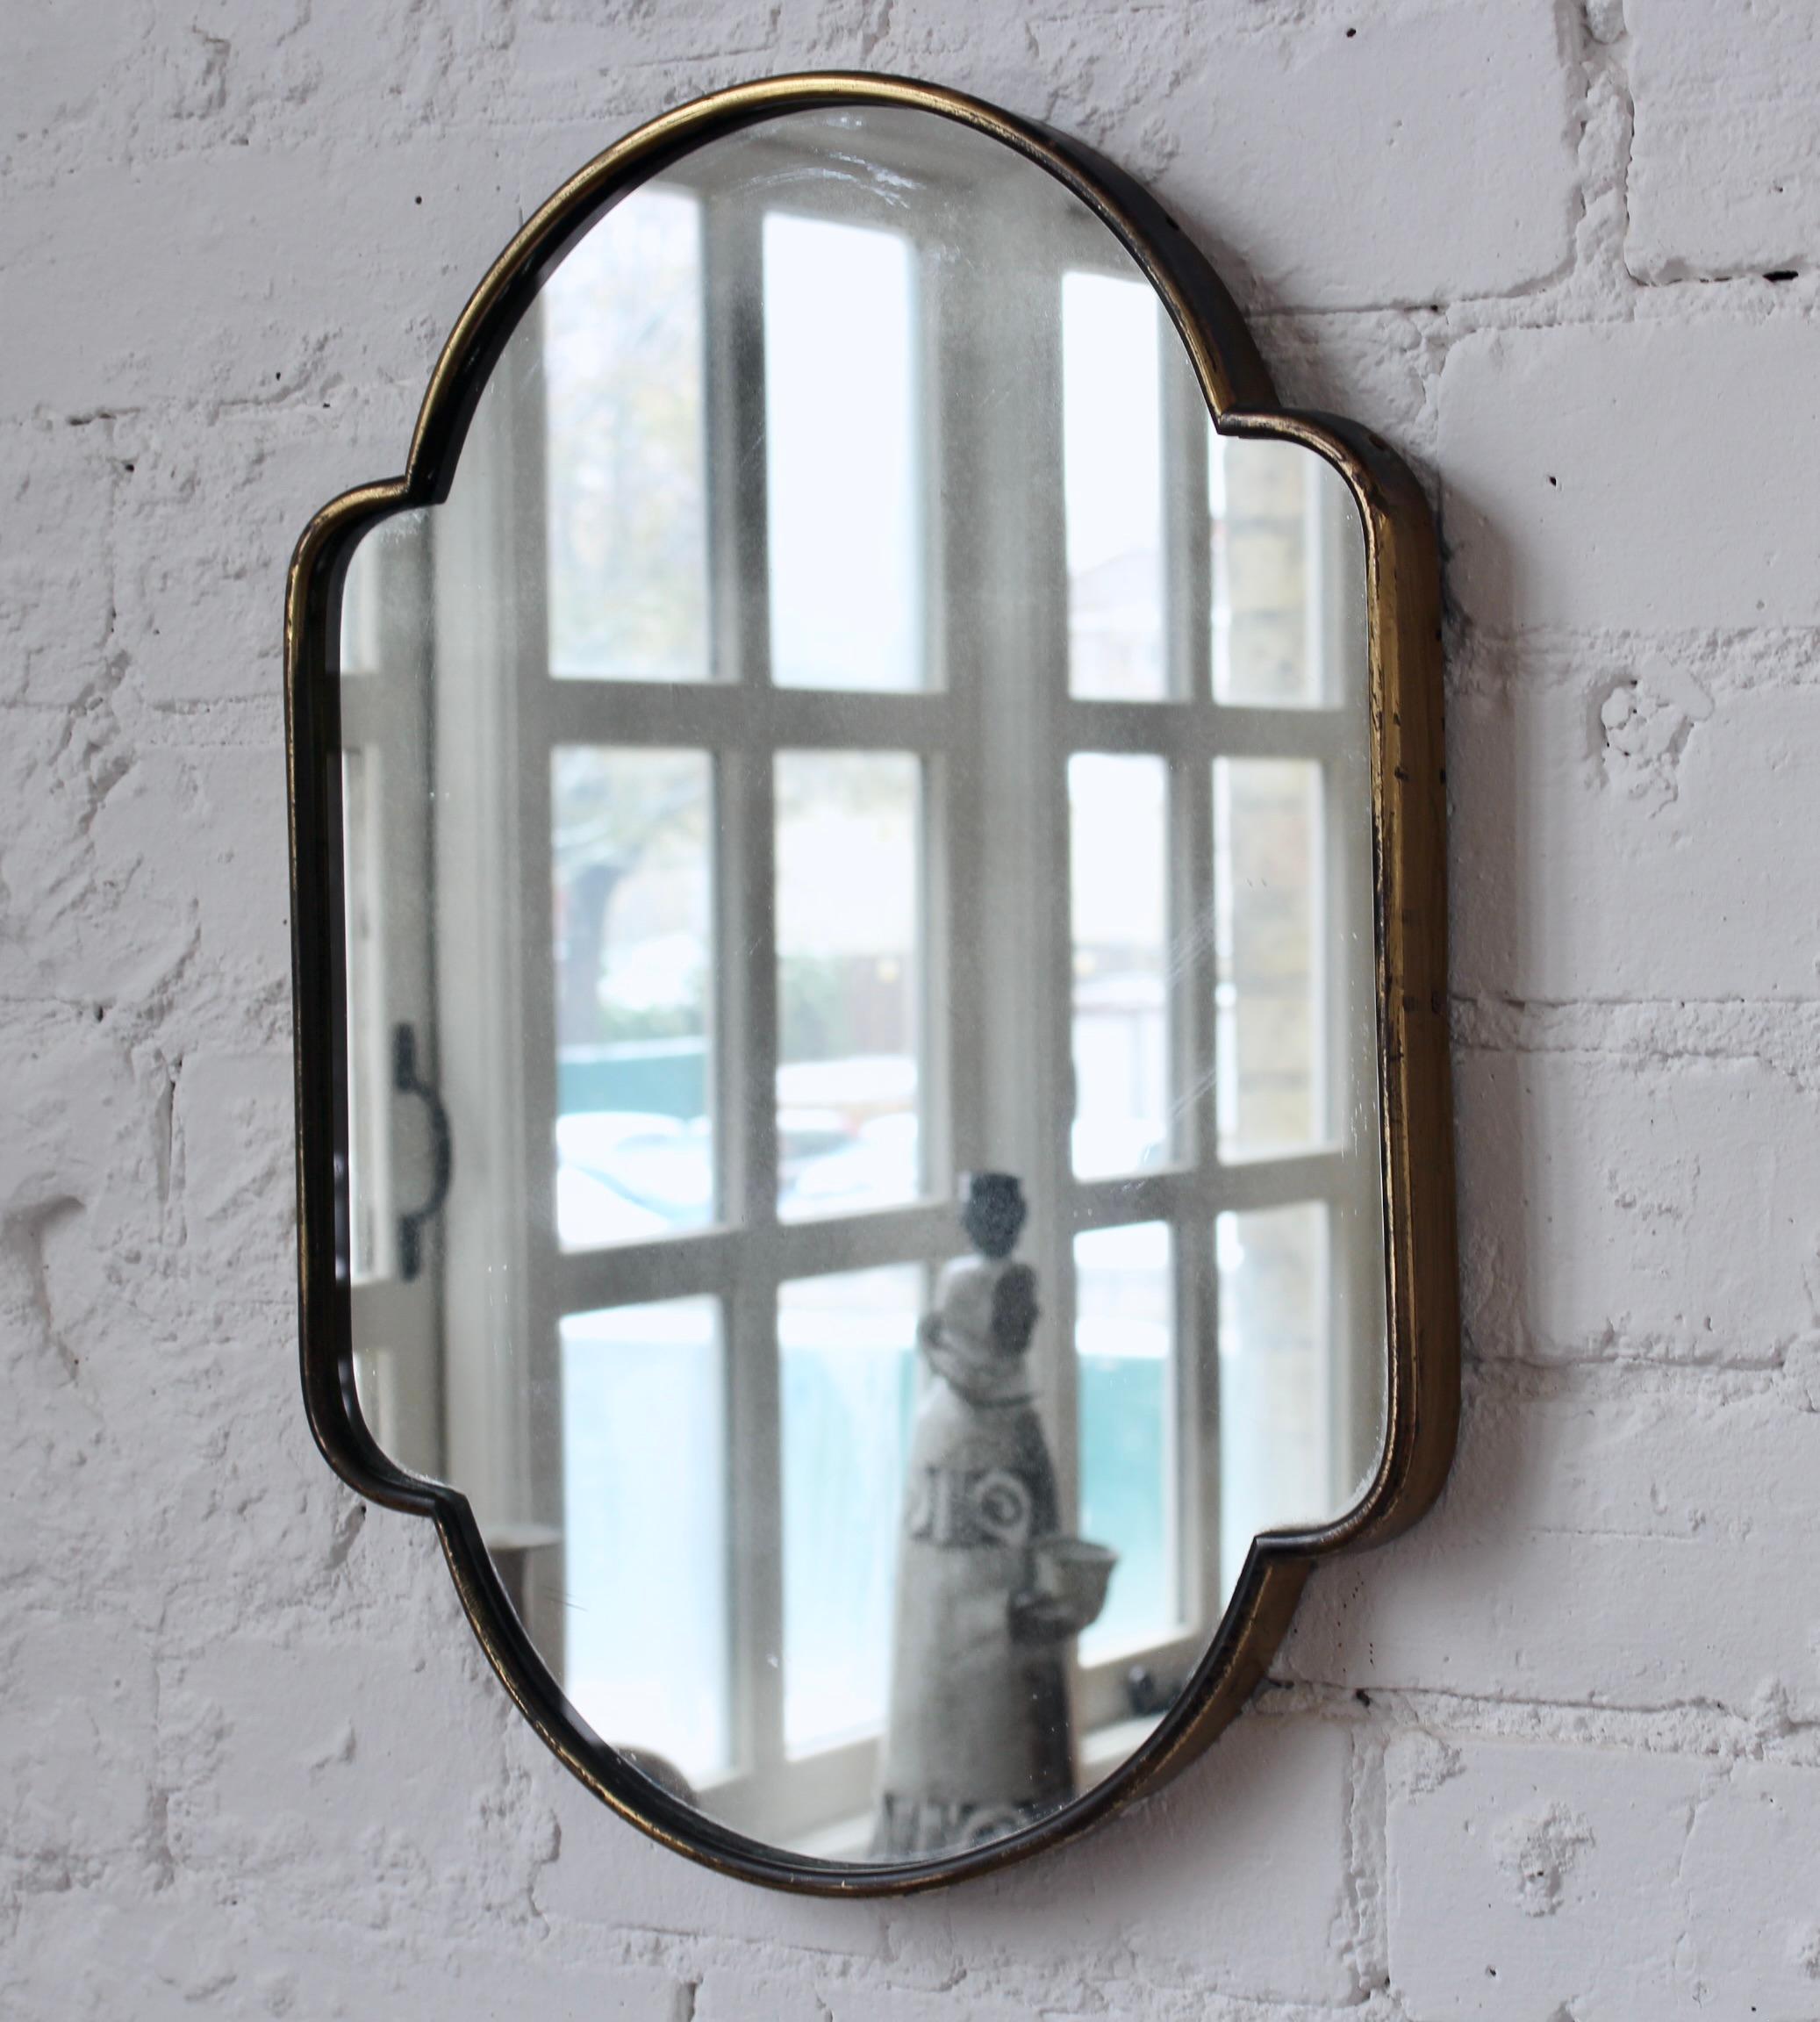 Small scale 'pill-shaped' vintage Italian wall mirror with brass frame (circa 1950s). The mirror has straight, rectangular-shaped sides but with a sensuous curve on top and on the bottom. It is classically elegant and distinctive in a modern Gio